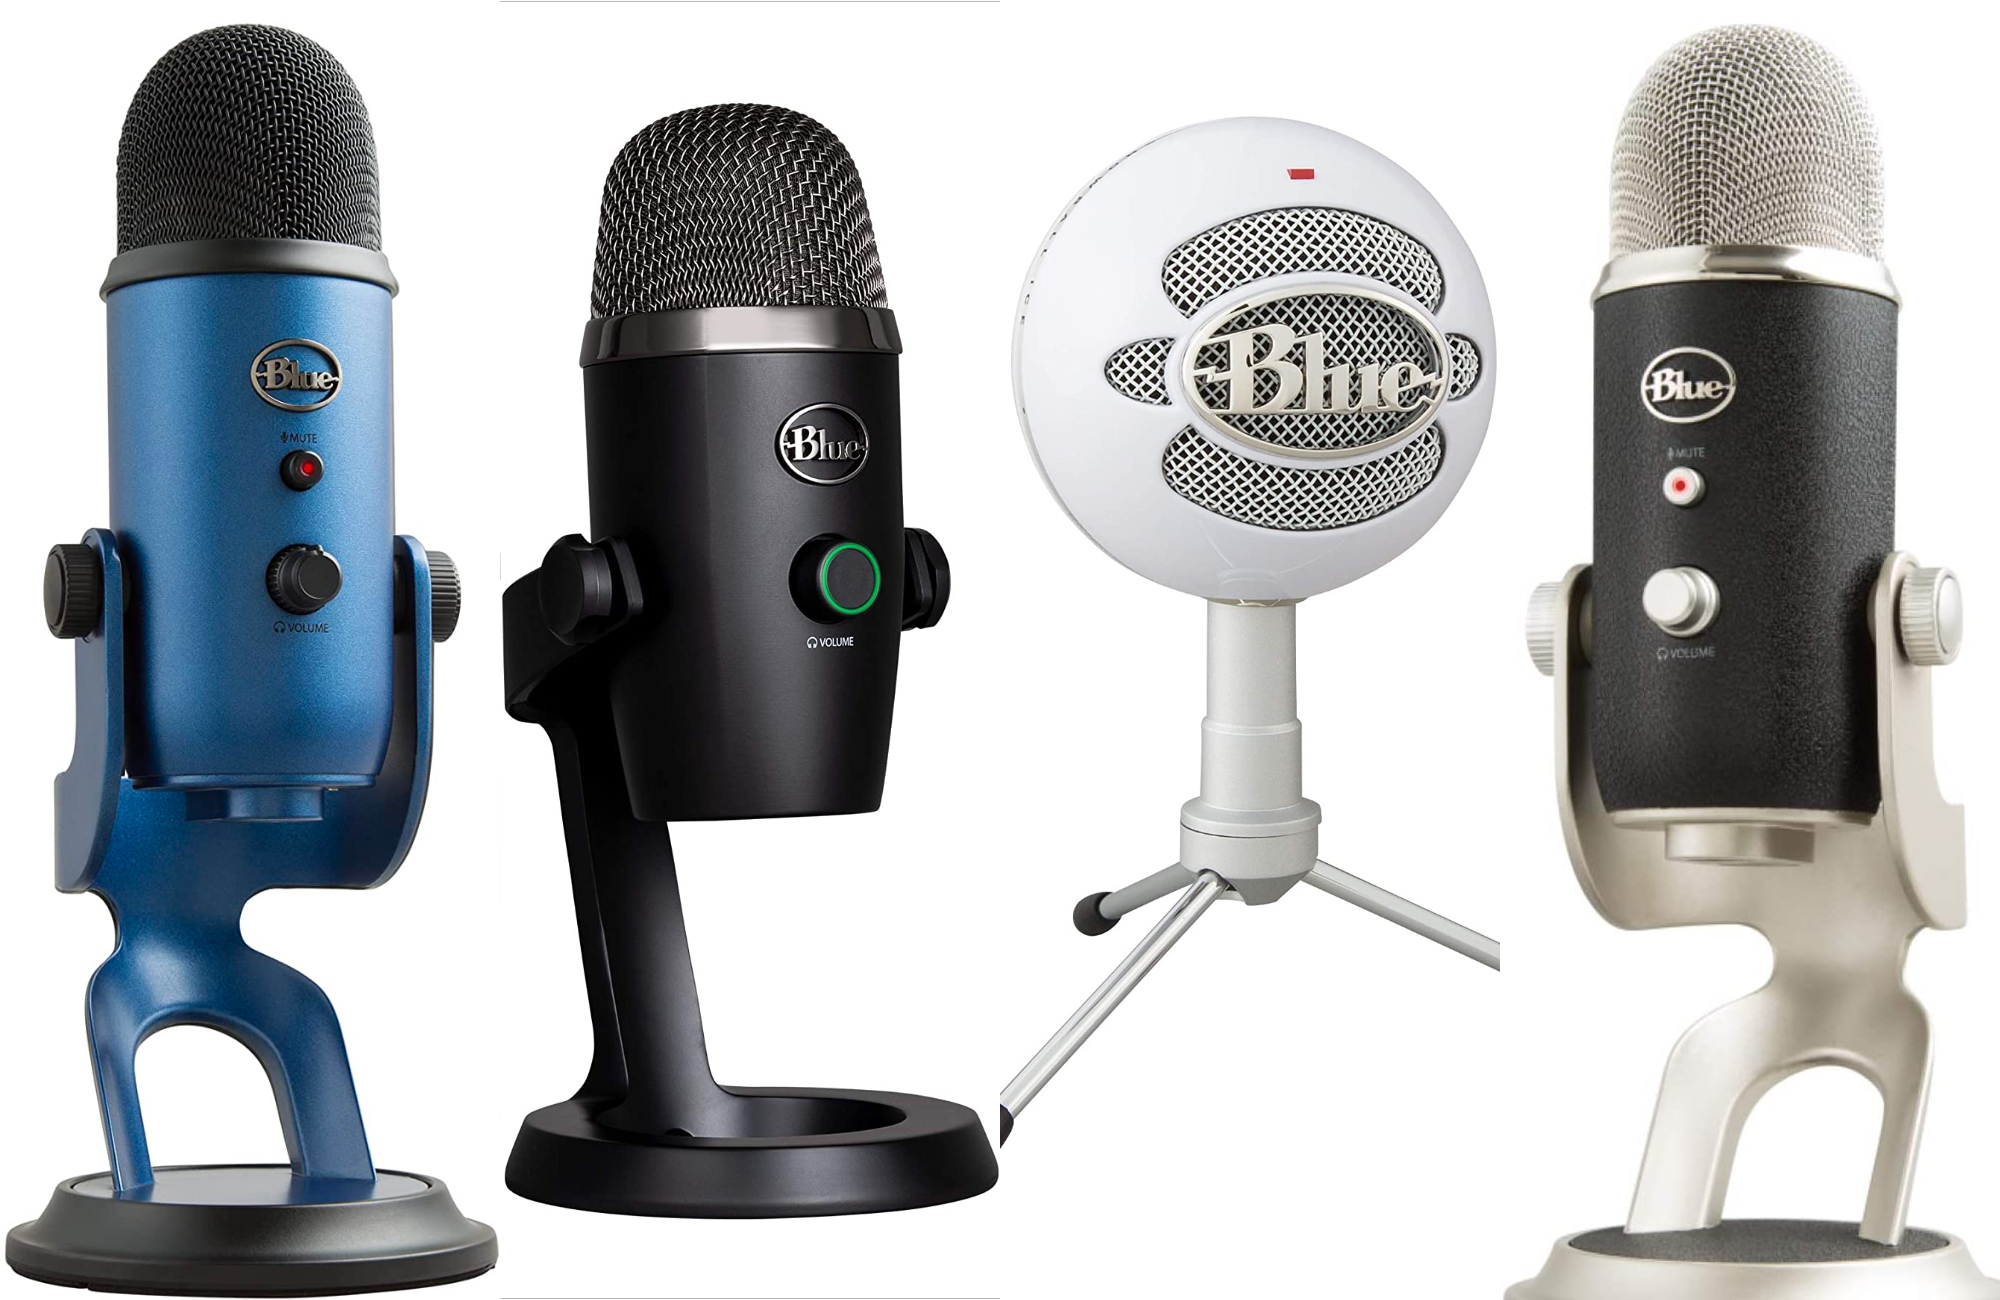 COMPARISON: Every shade of blue YETI has made so far for their